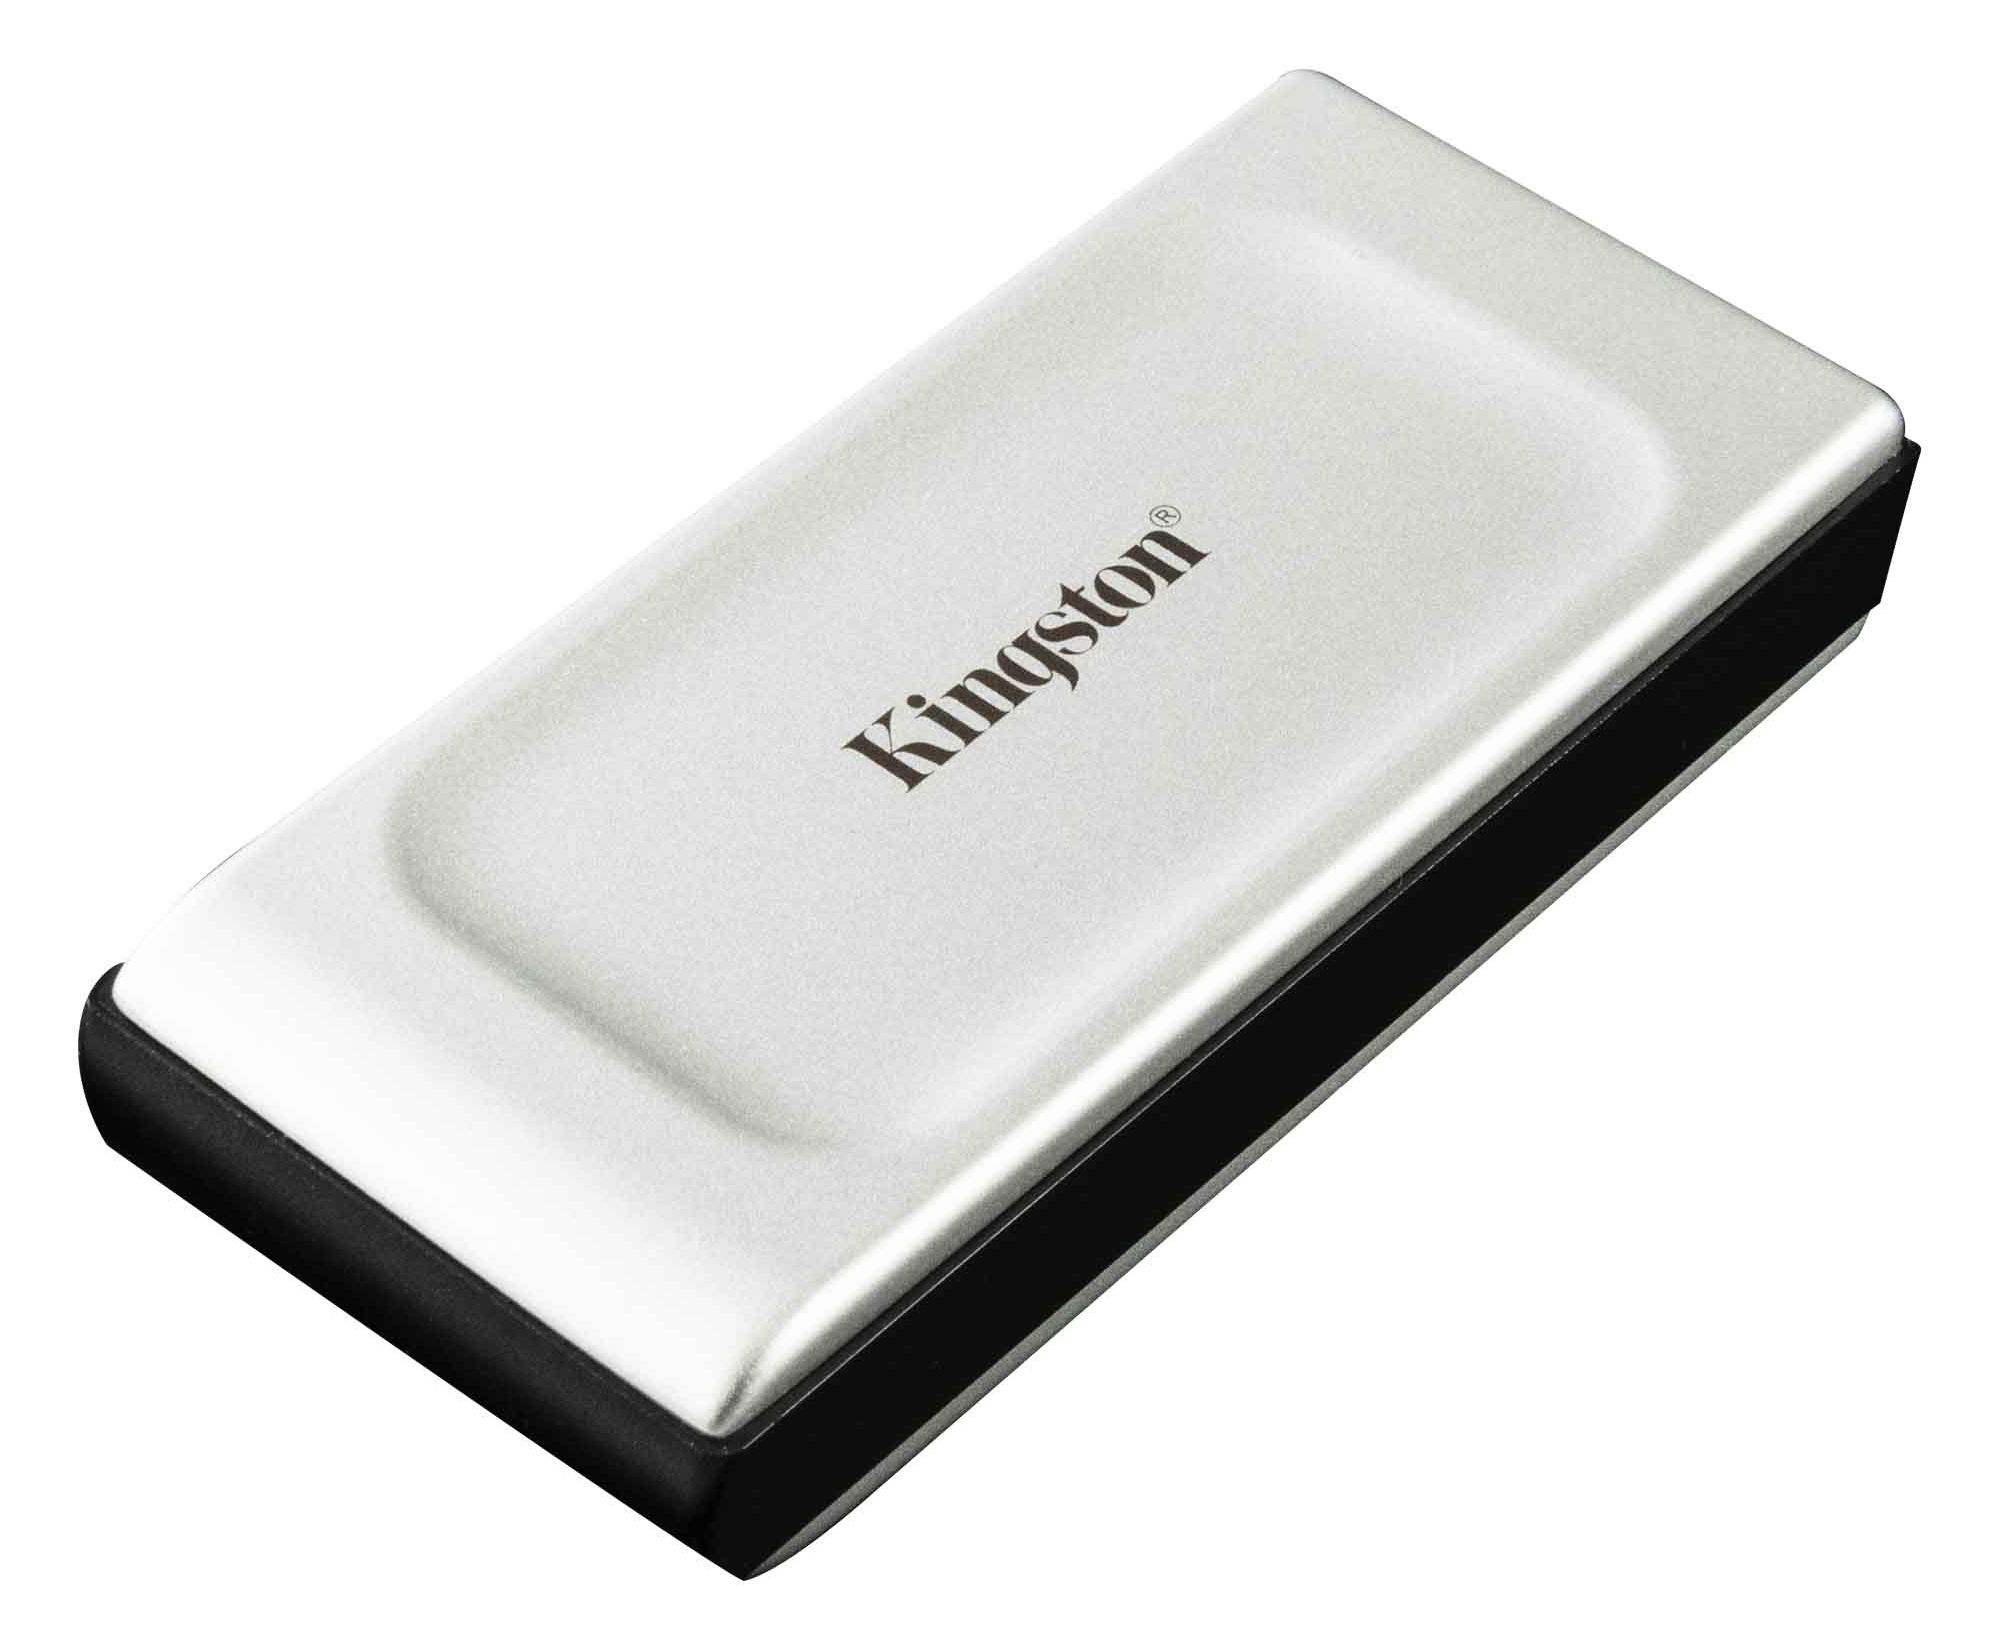 Kingston XS200 USB SSD - Most transportable high-capability drive